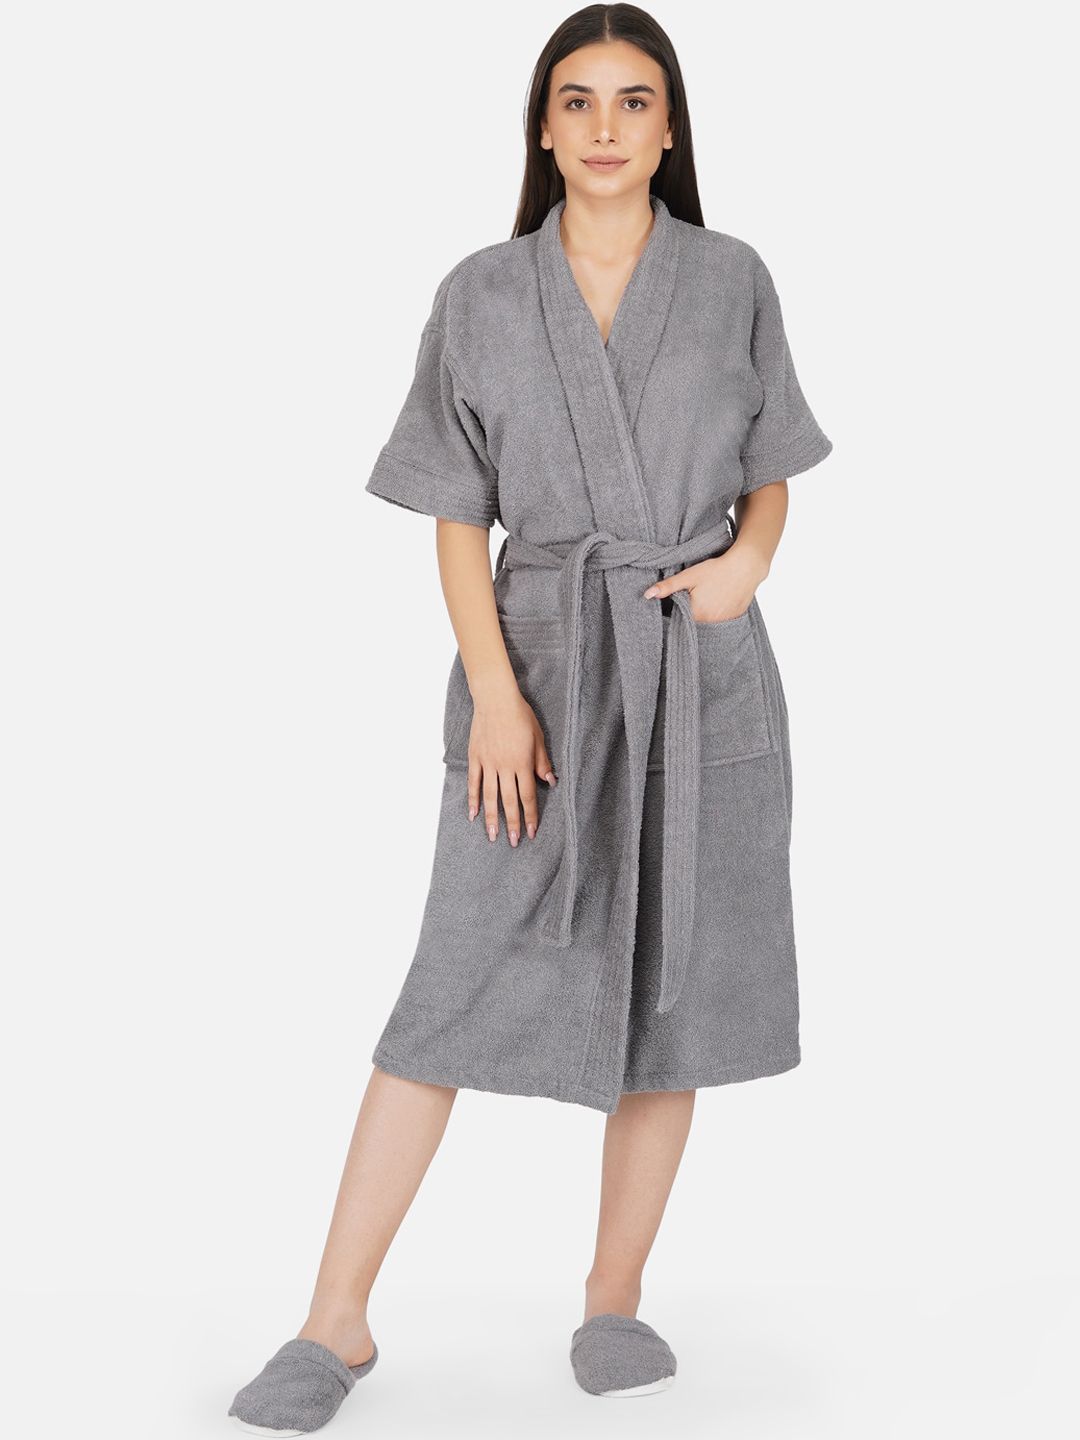 RANGOLI Unisex Grey Pure Cotton 400 GSM Bathrobe with Room Slippers Price in India